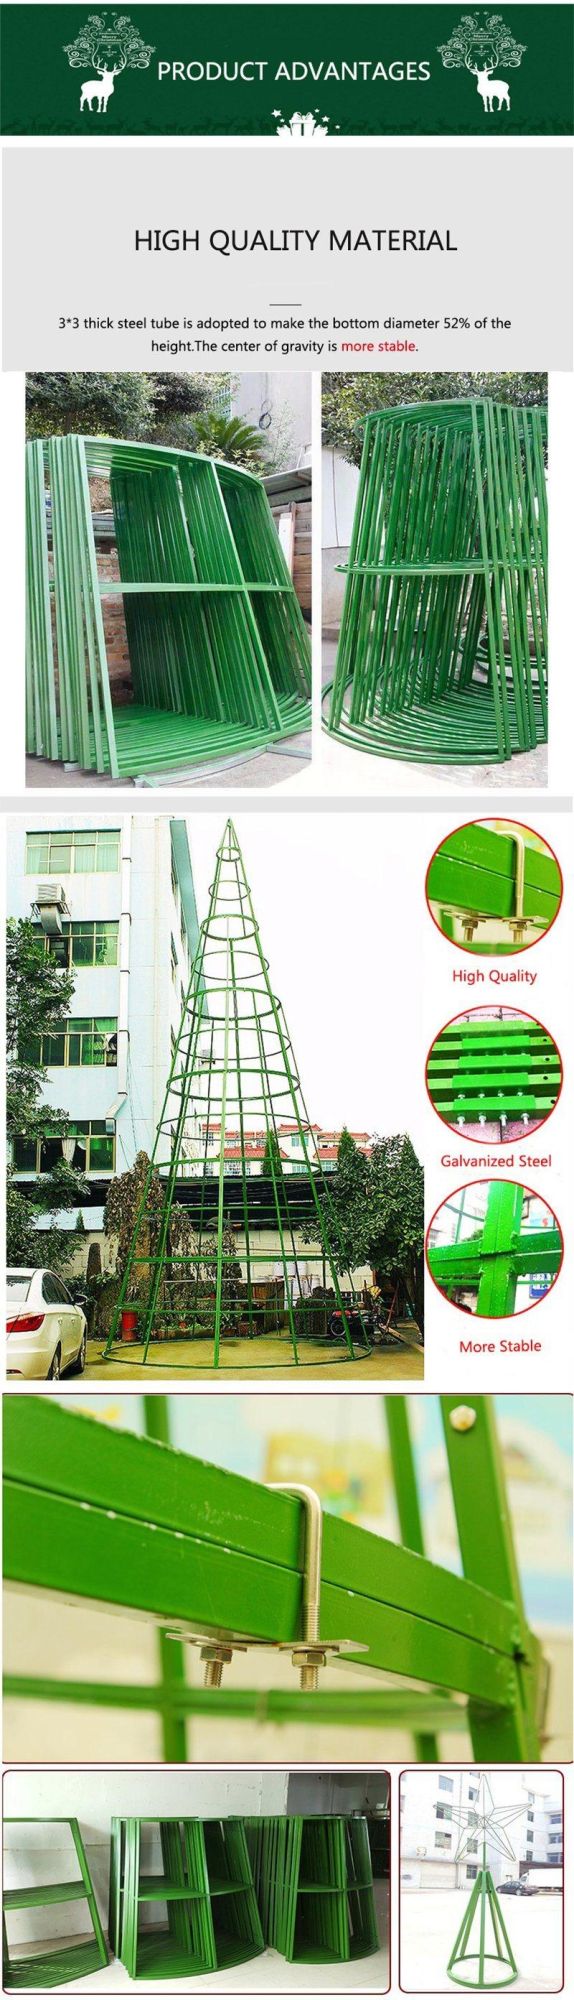 Artificial Christmas Trees PVC 20FT 30FT 40FT 50FT Giant Outdoor Lighting Christmas Tree with High Quality